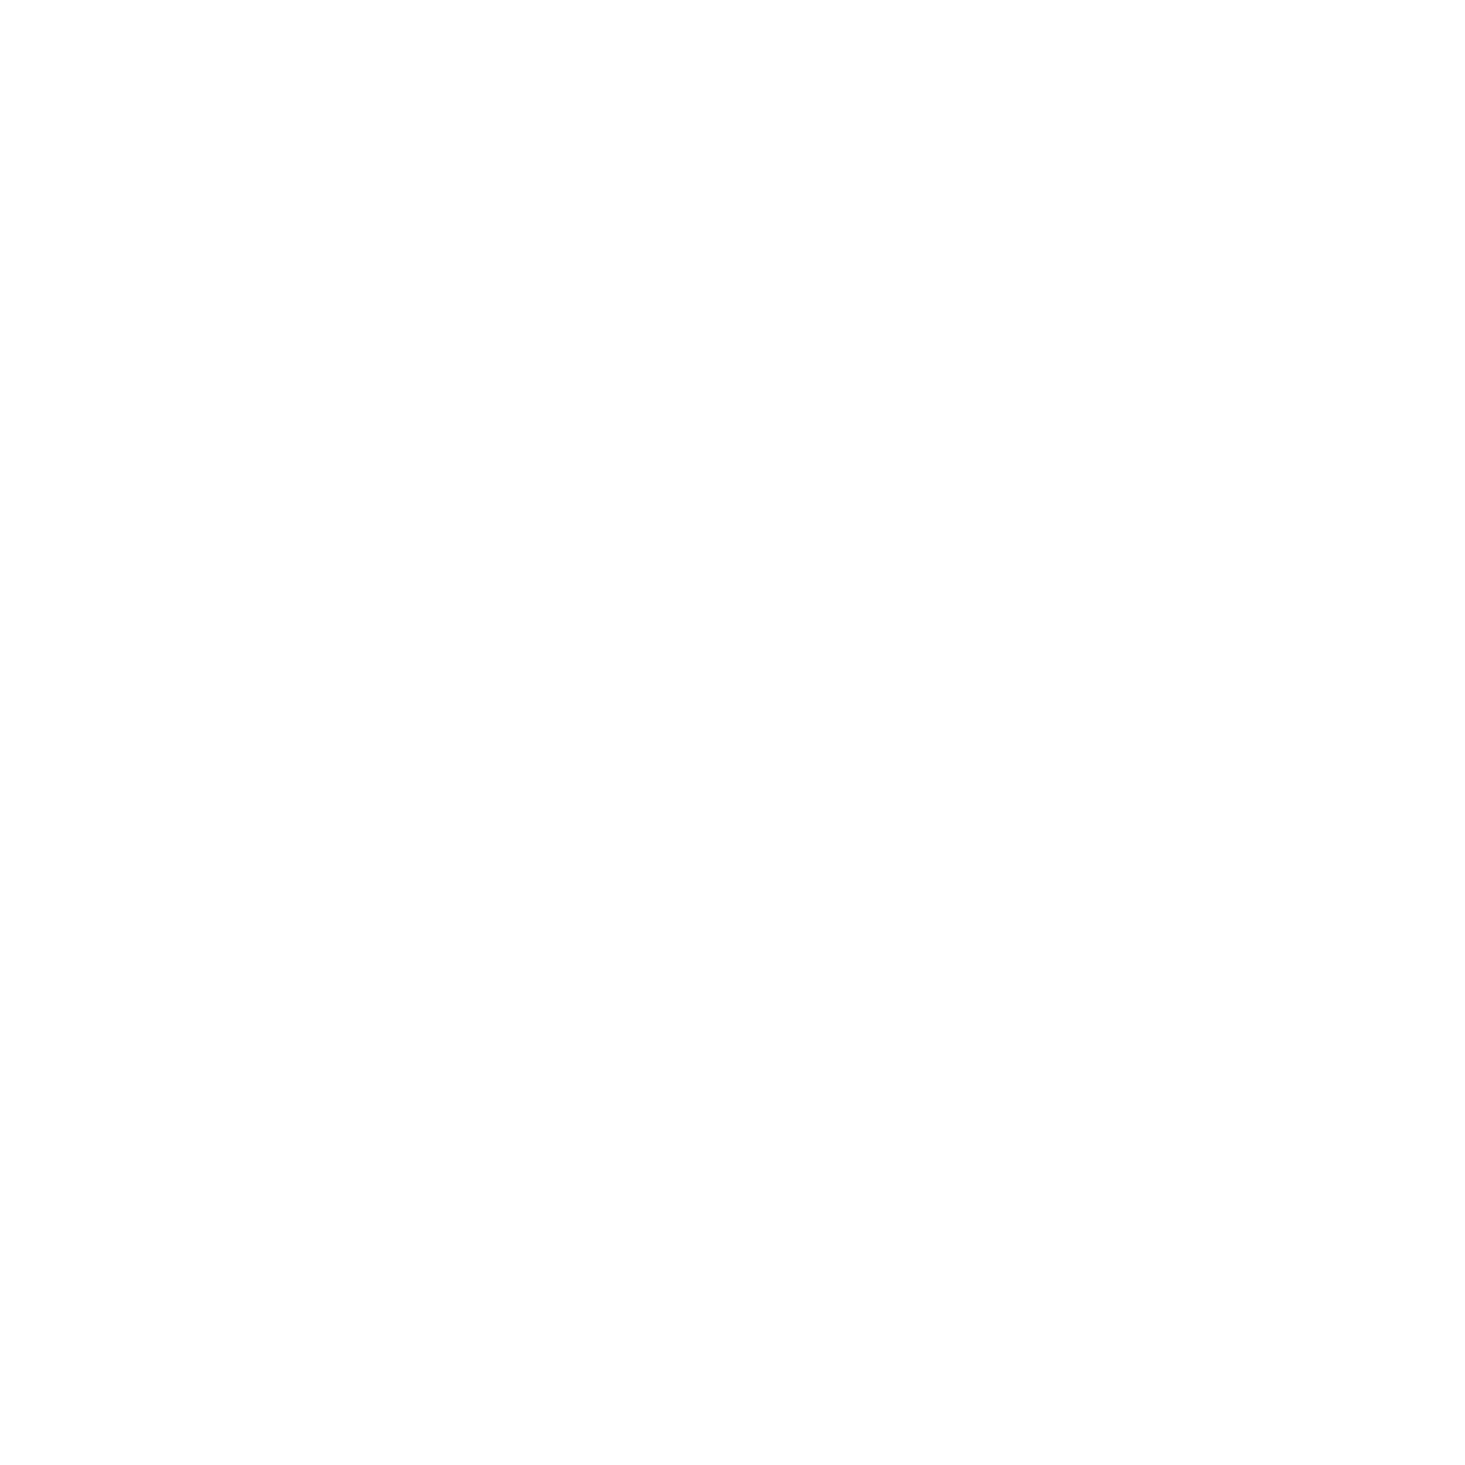 Sterling Land Company logo - Click to go to home page